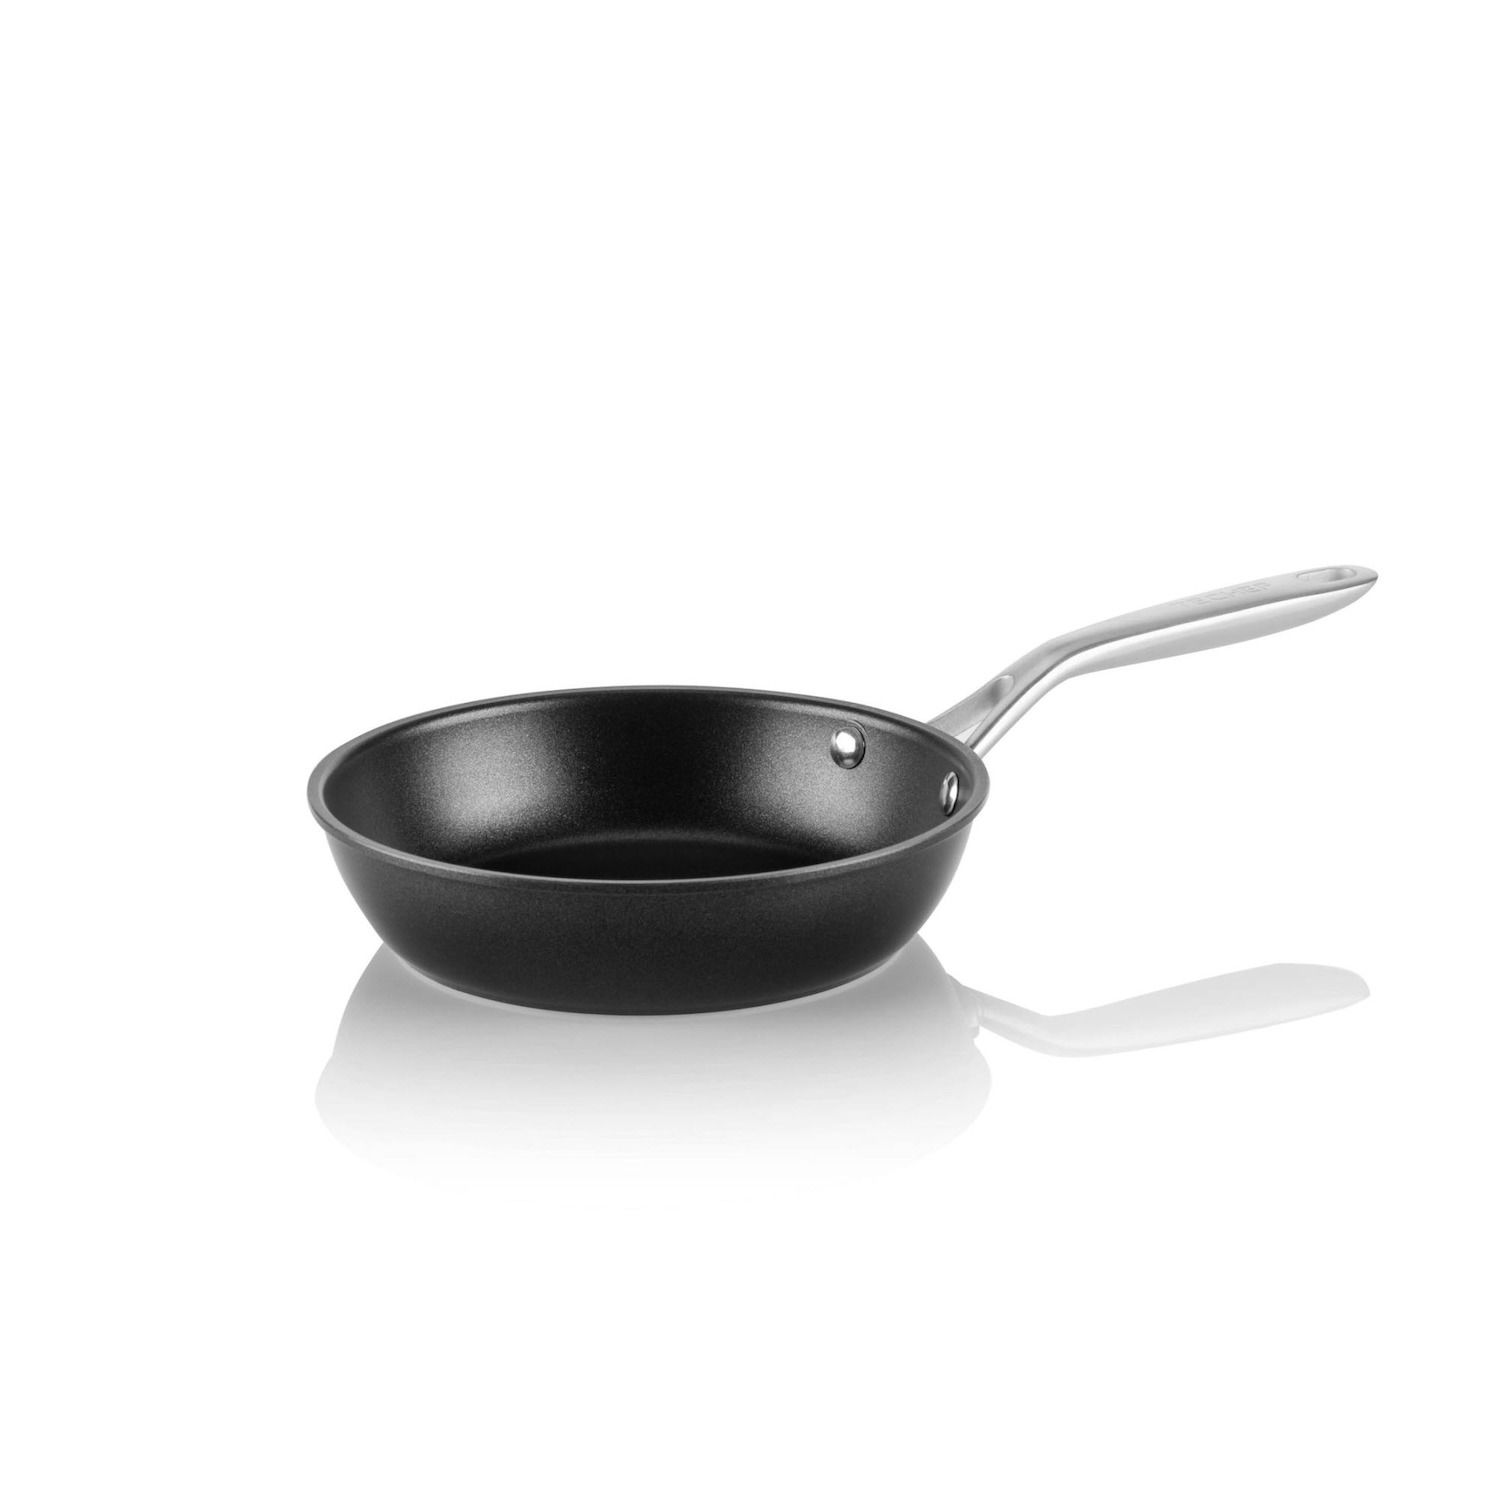 TECHEF CeraTerra Collection 12 Wok/Stir-Fry Pan with Lid